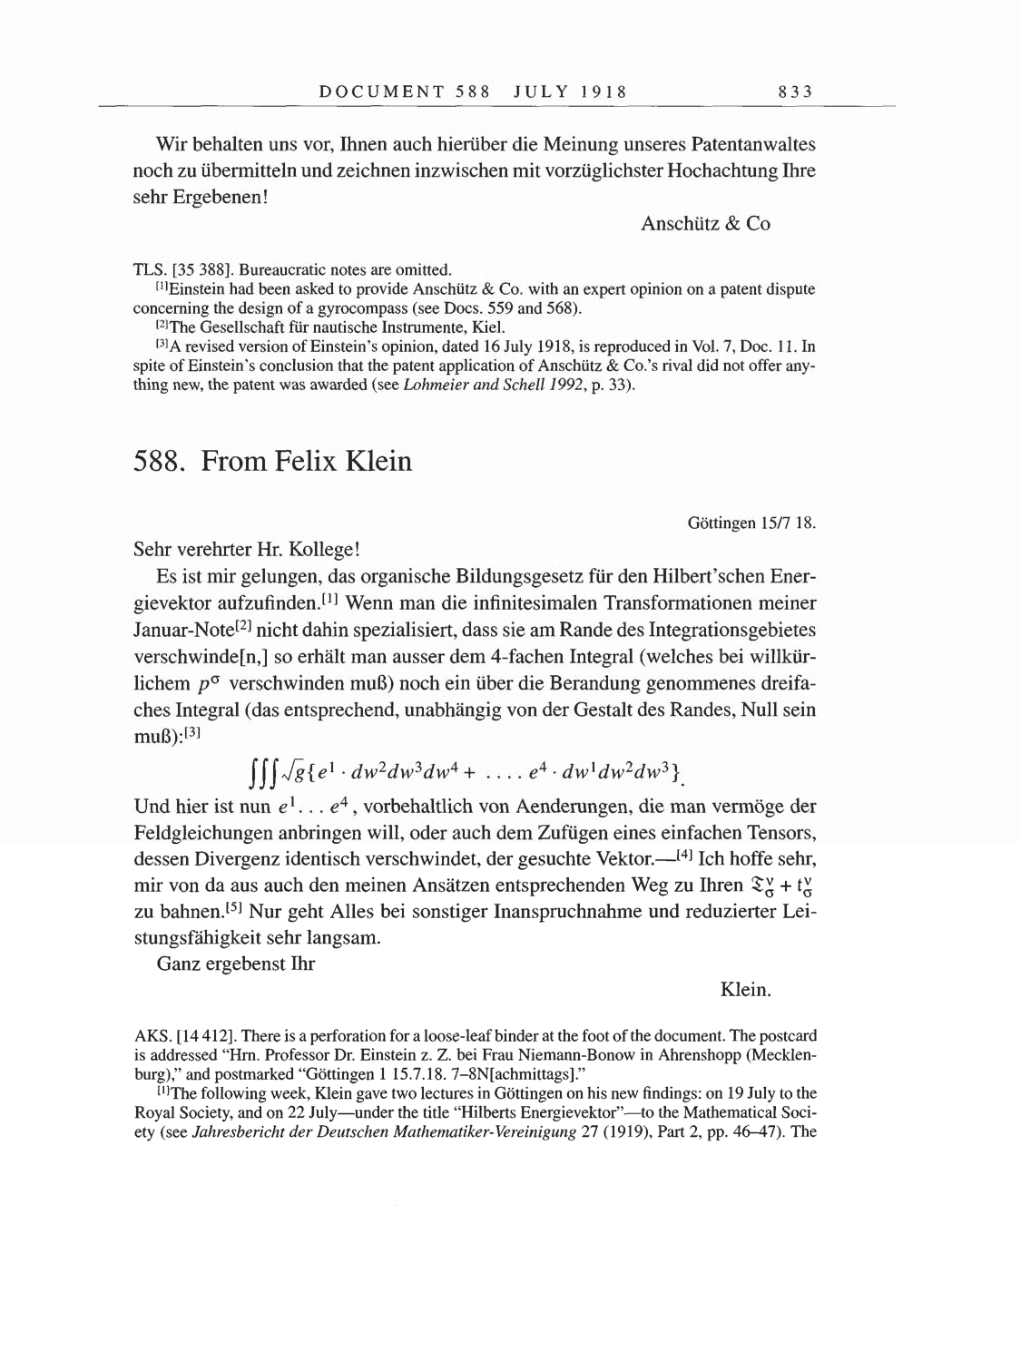 Volume 8, Part B: The Berlin Years: Correspondence 1918 page 833